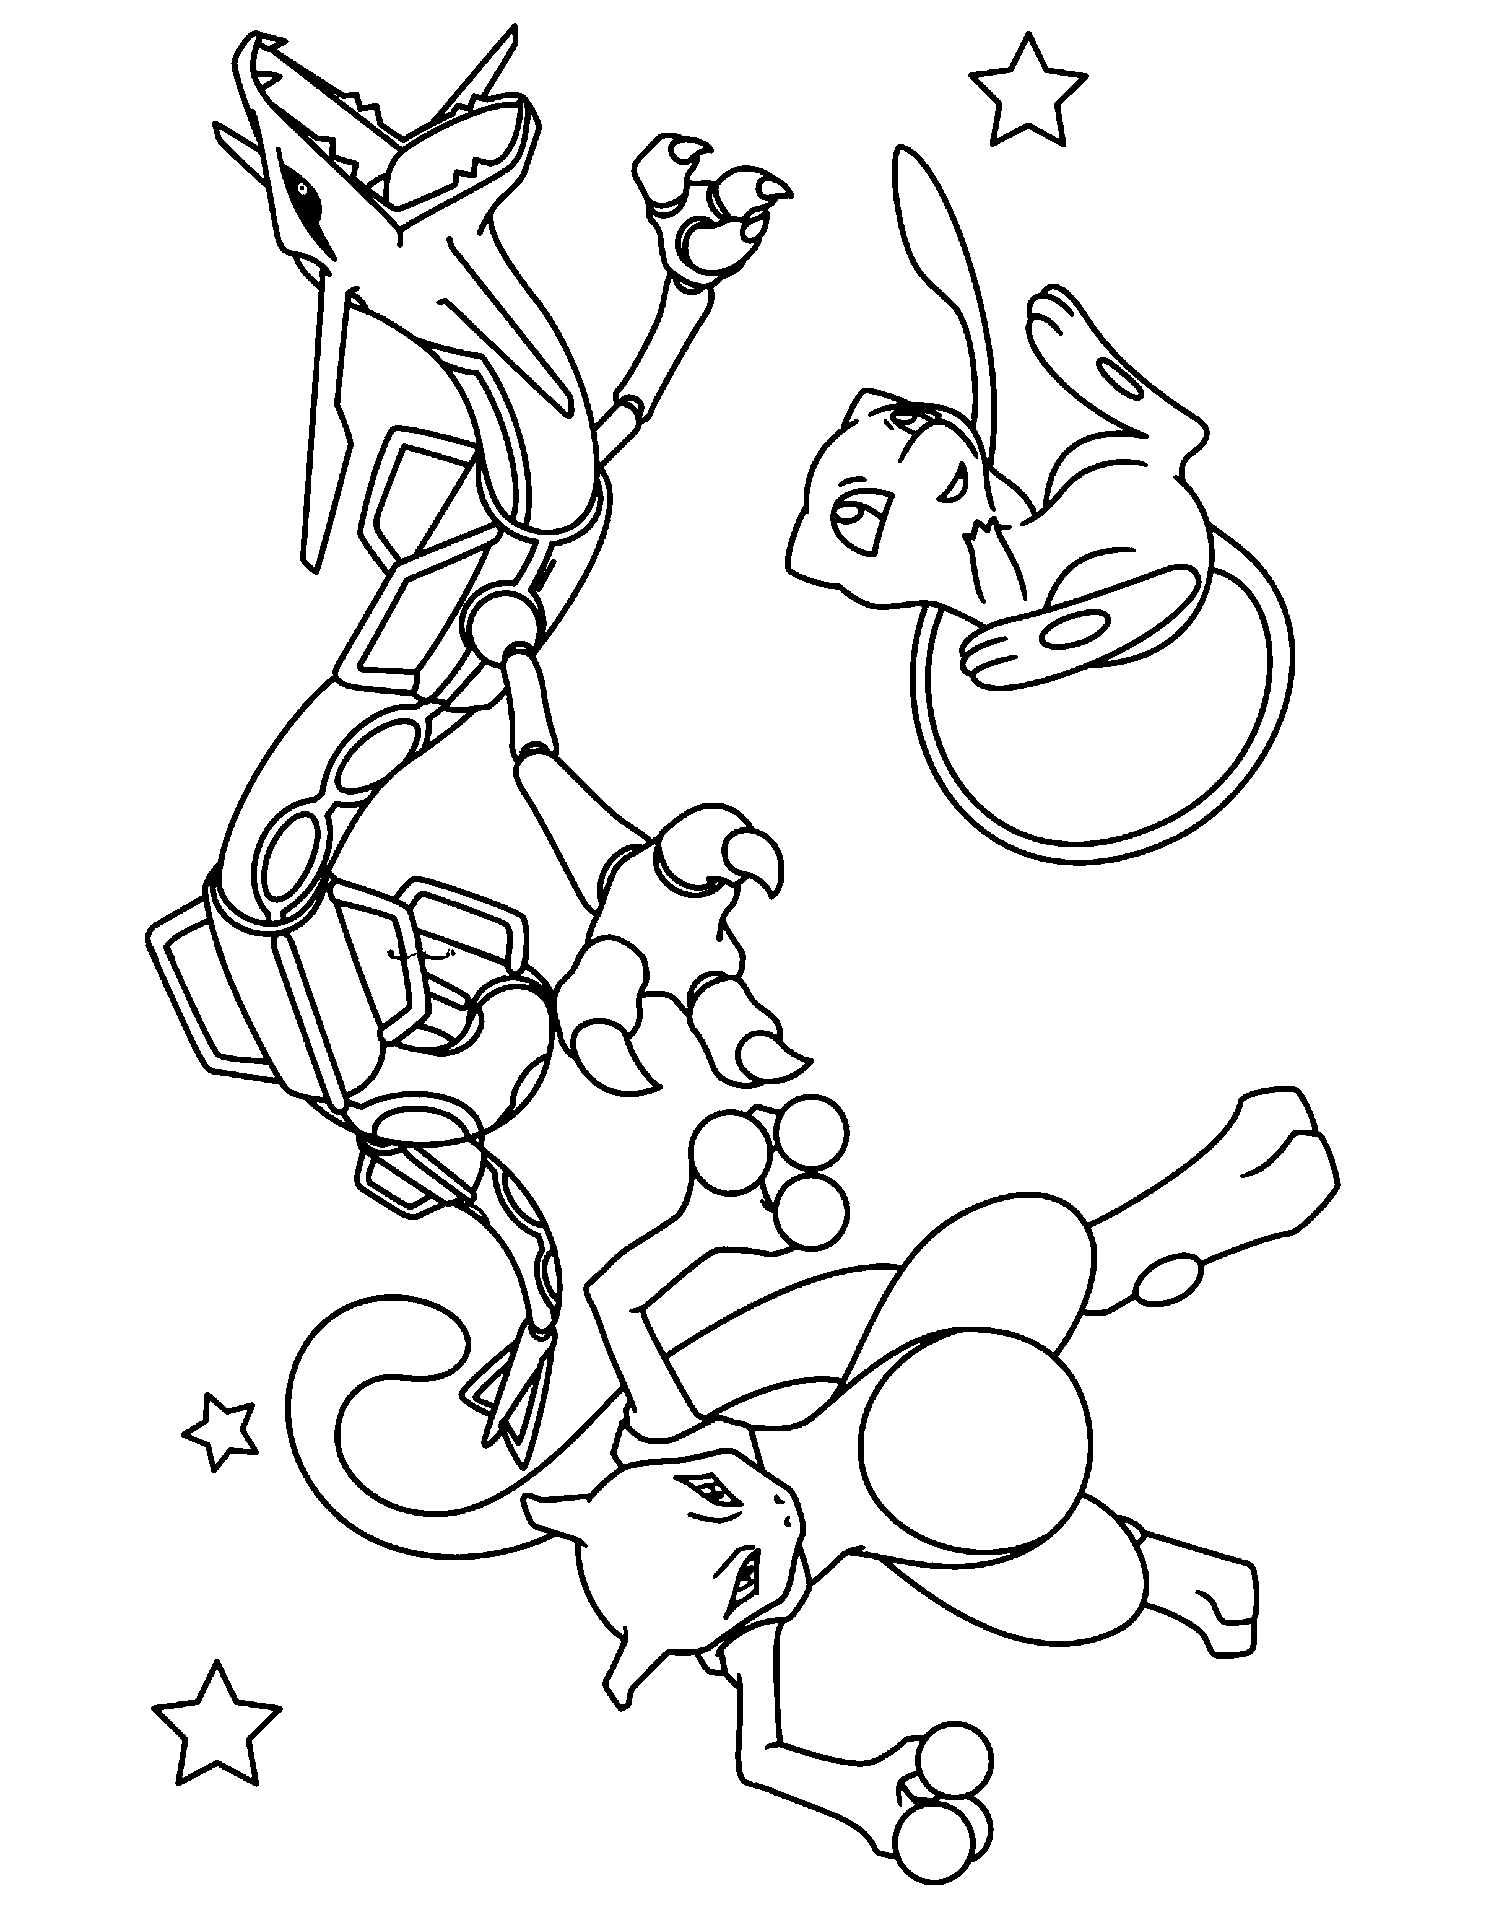 Mewtwo Cool Image Coloring Page